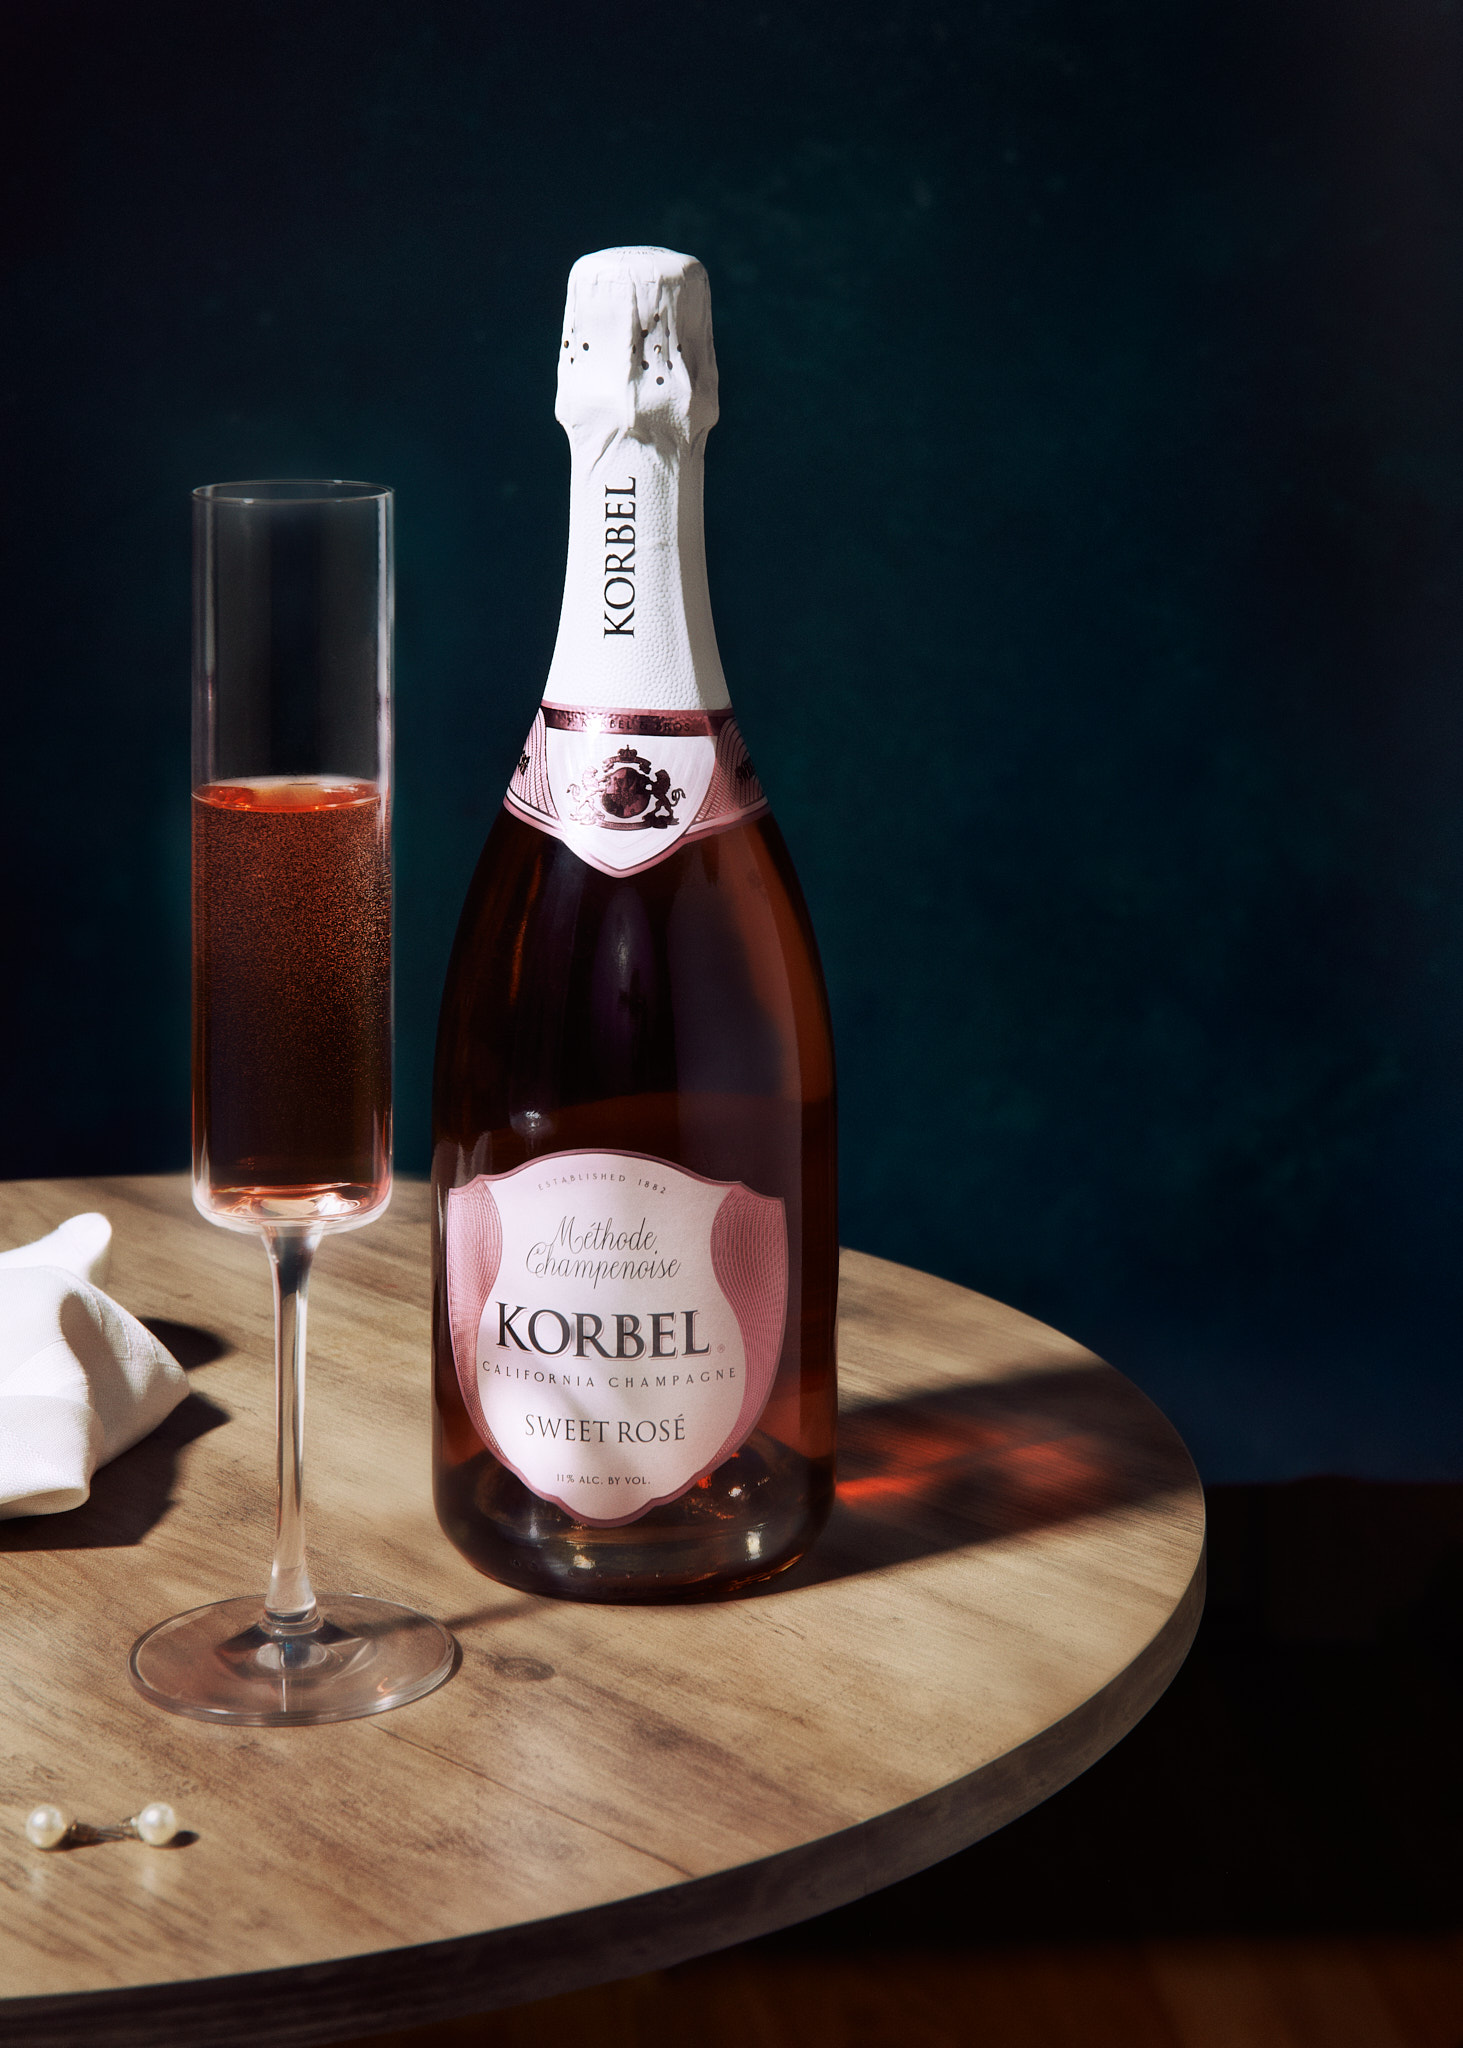 Bottle of Korbel Sweet Rosé California Champagne with a filled champagne flute on a wooden table.